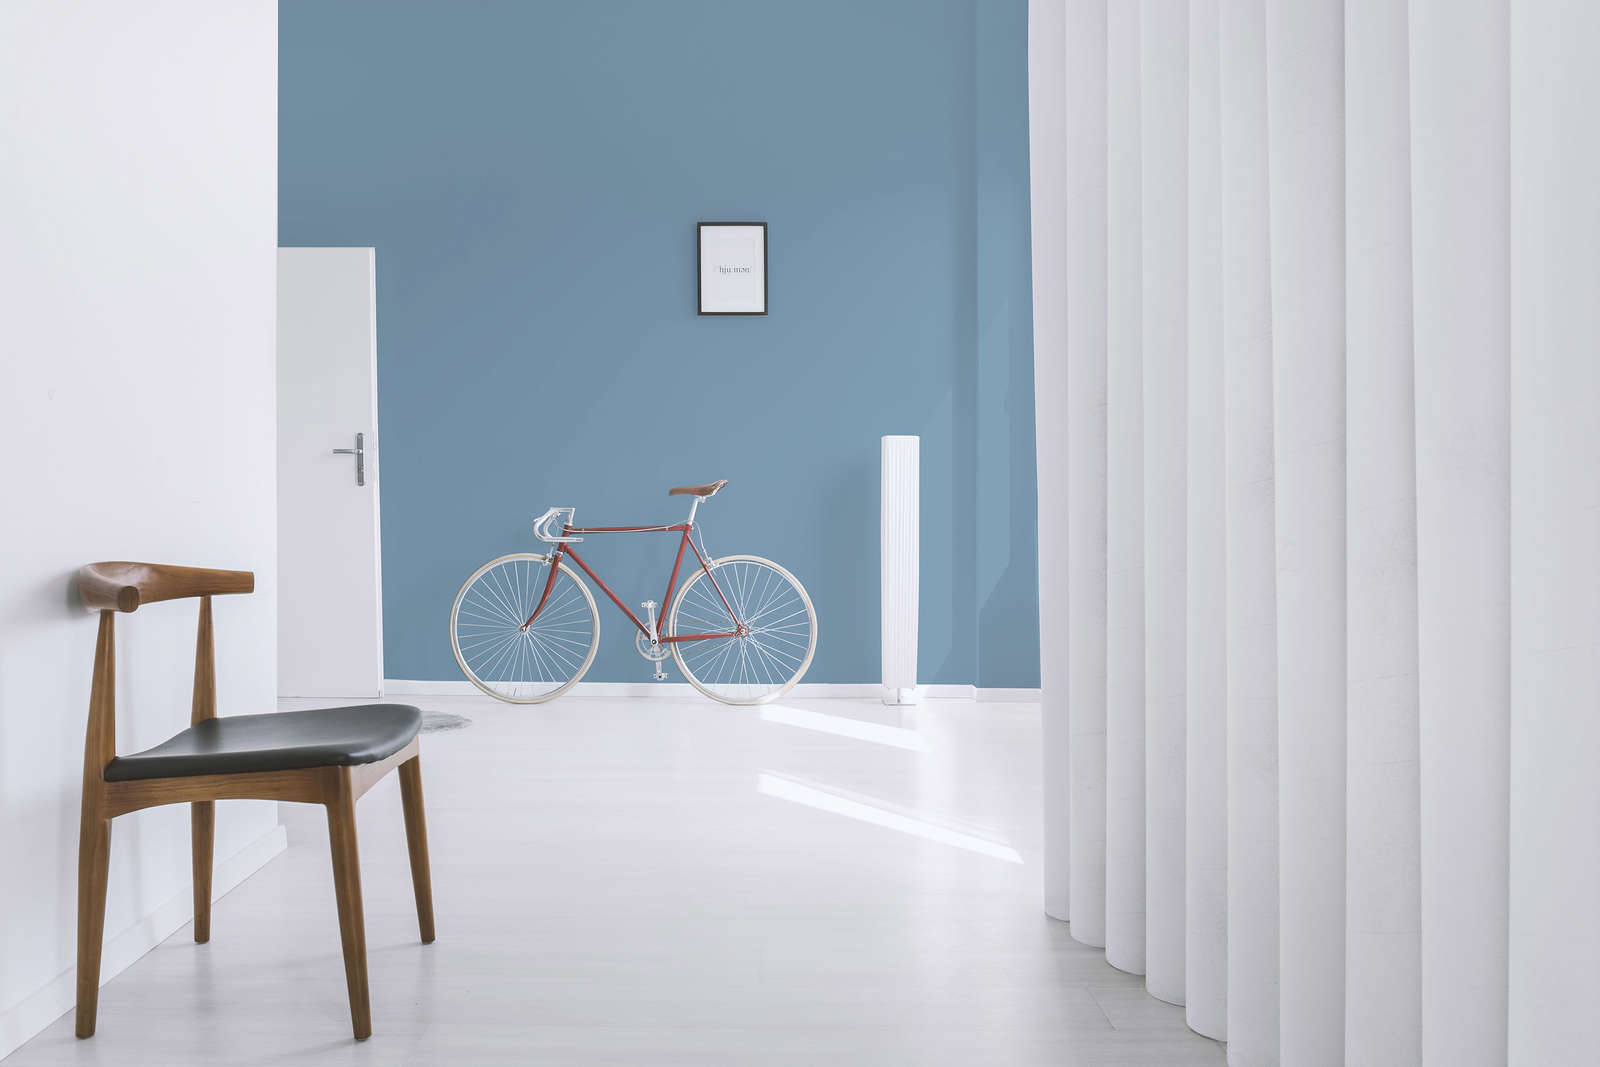             Premium Wall Paint Serene Nordic Blue »Blissful Blue« NW306 – 1 litre
        